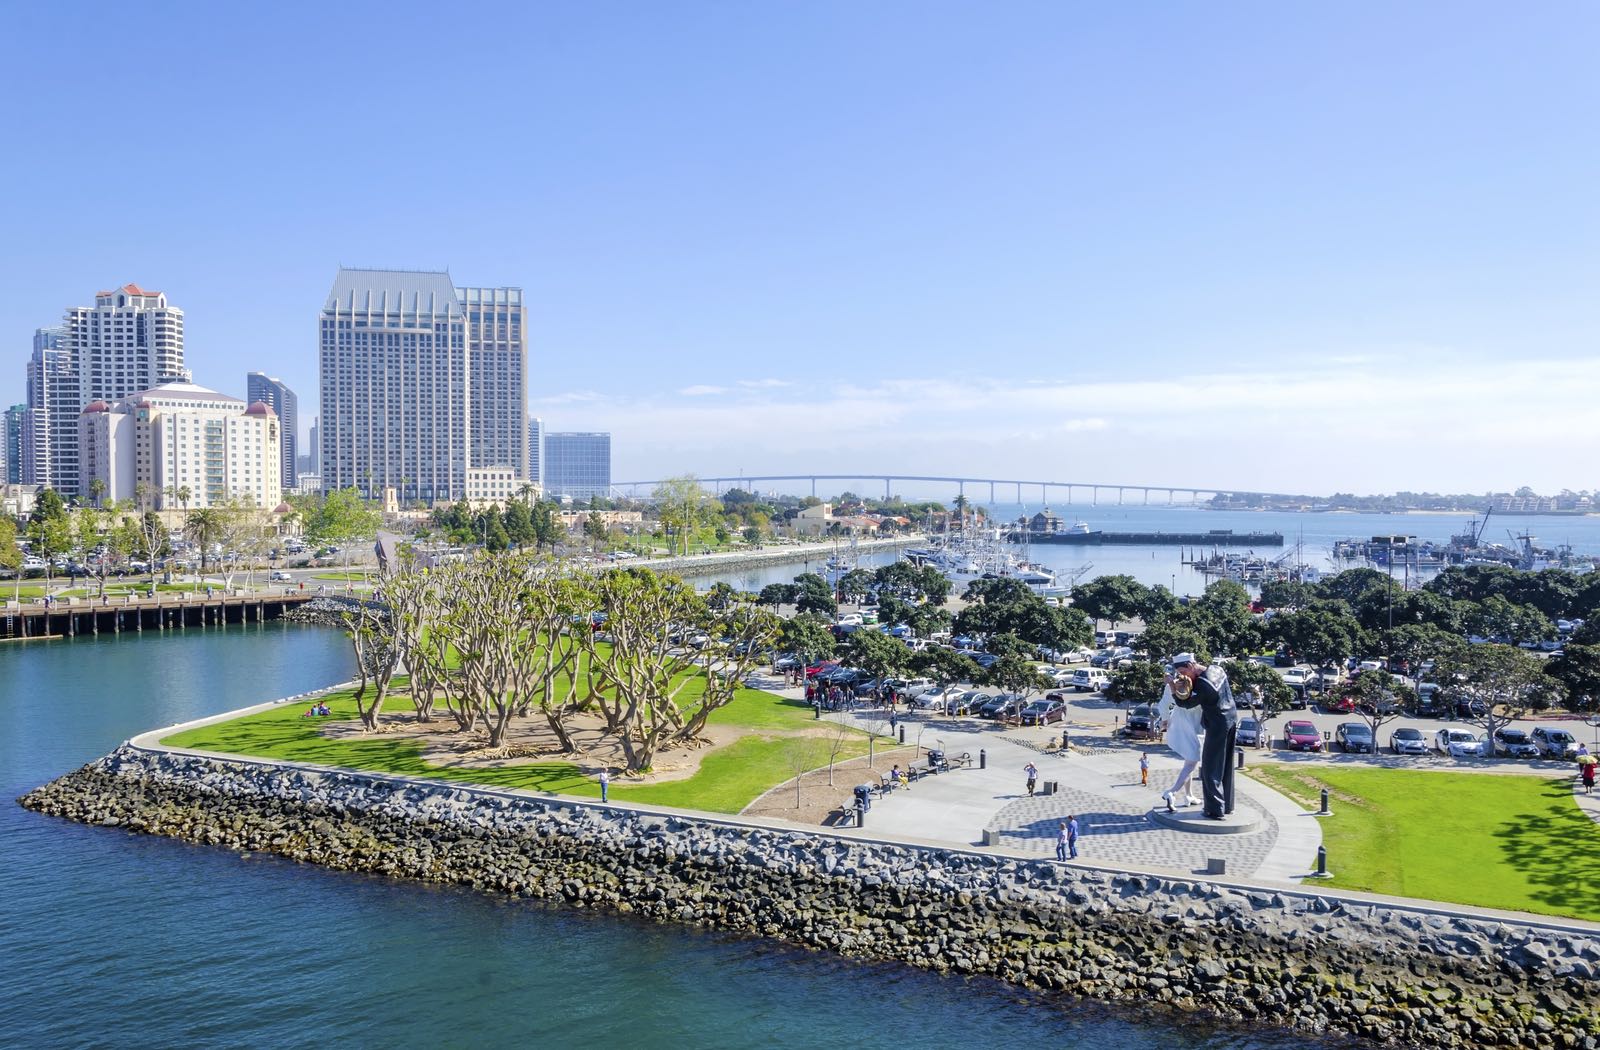 San Diego Embarcadero - Top Things to Do